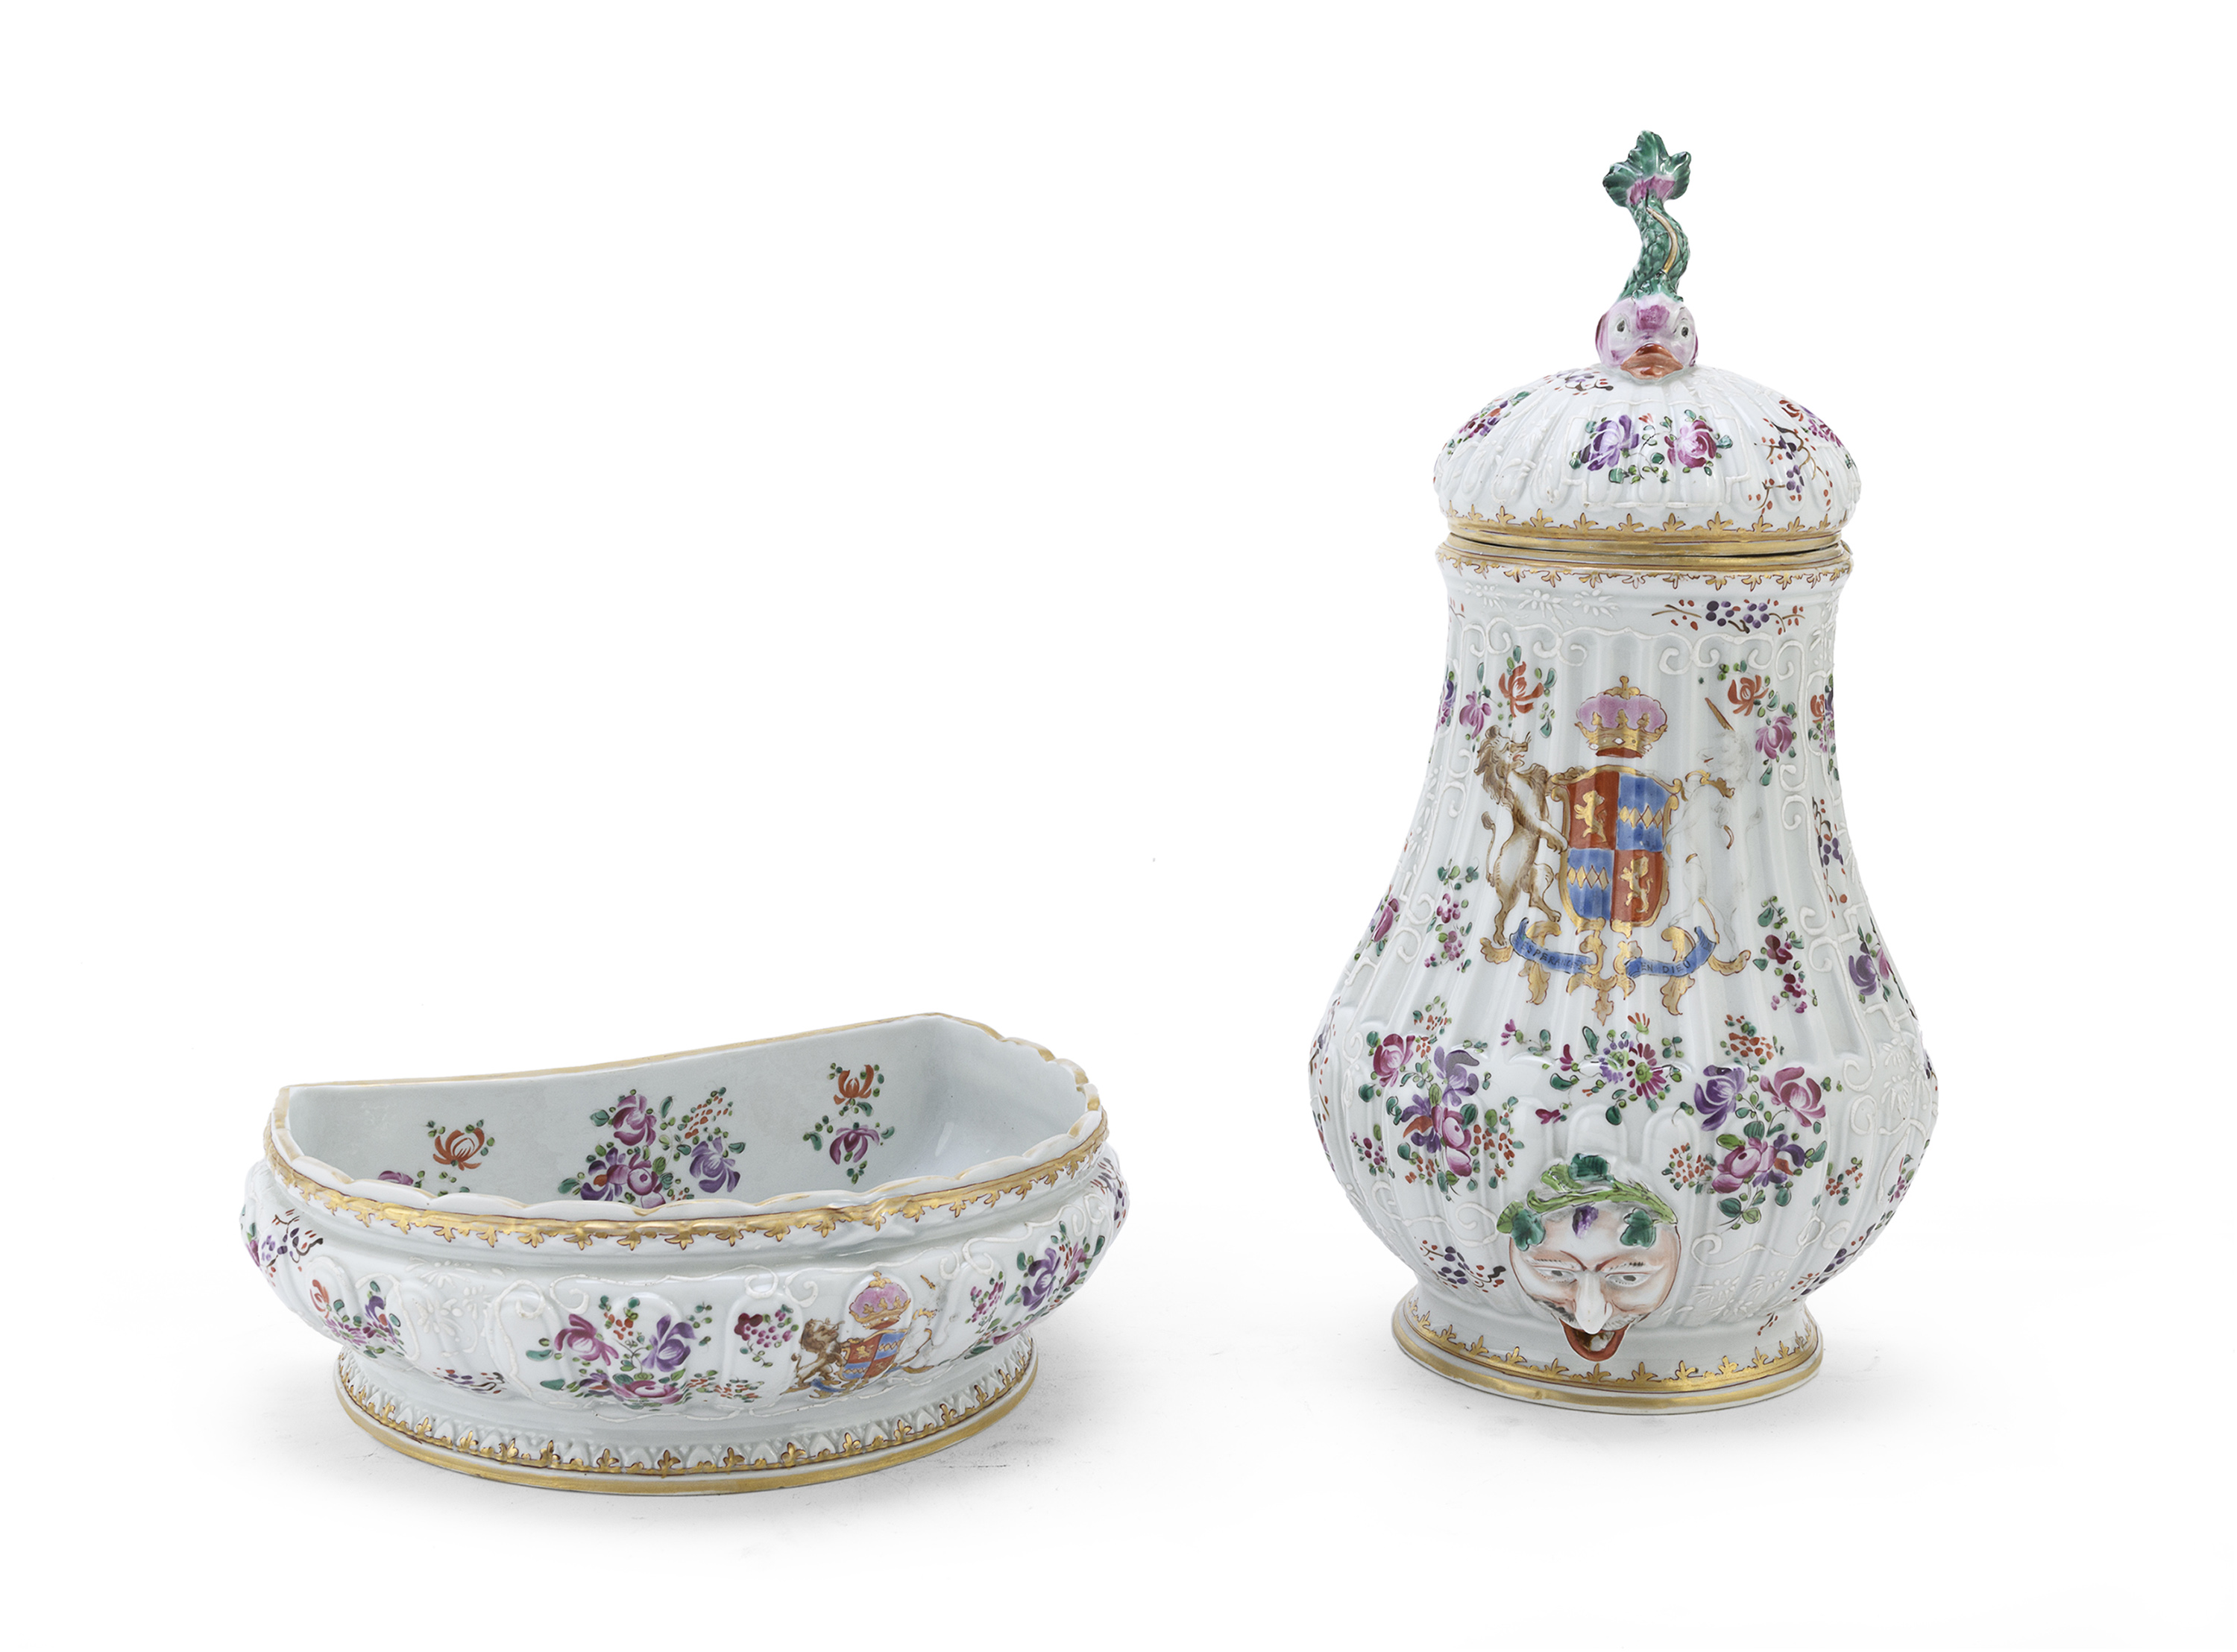 A PORCELAIN ENAMELED WALL FOUNTAIN WITH COVER AND BASIN FRANCE LATE 19TH CENTURY